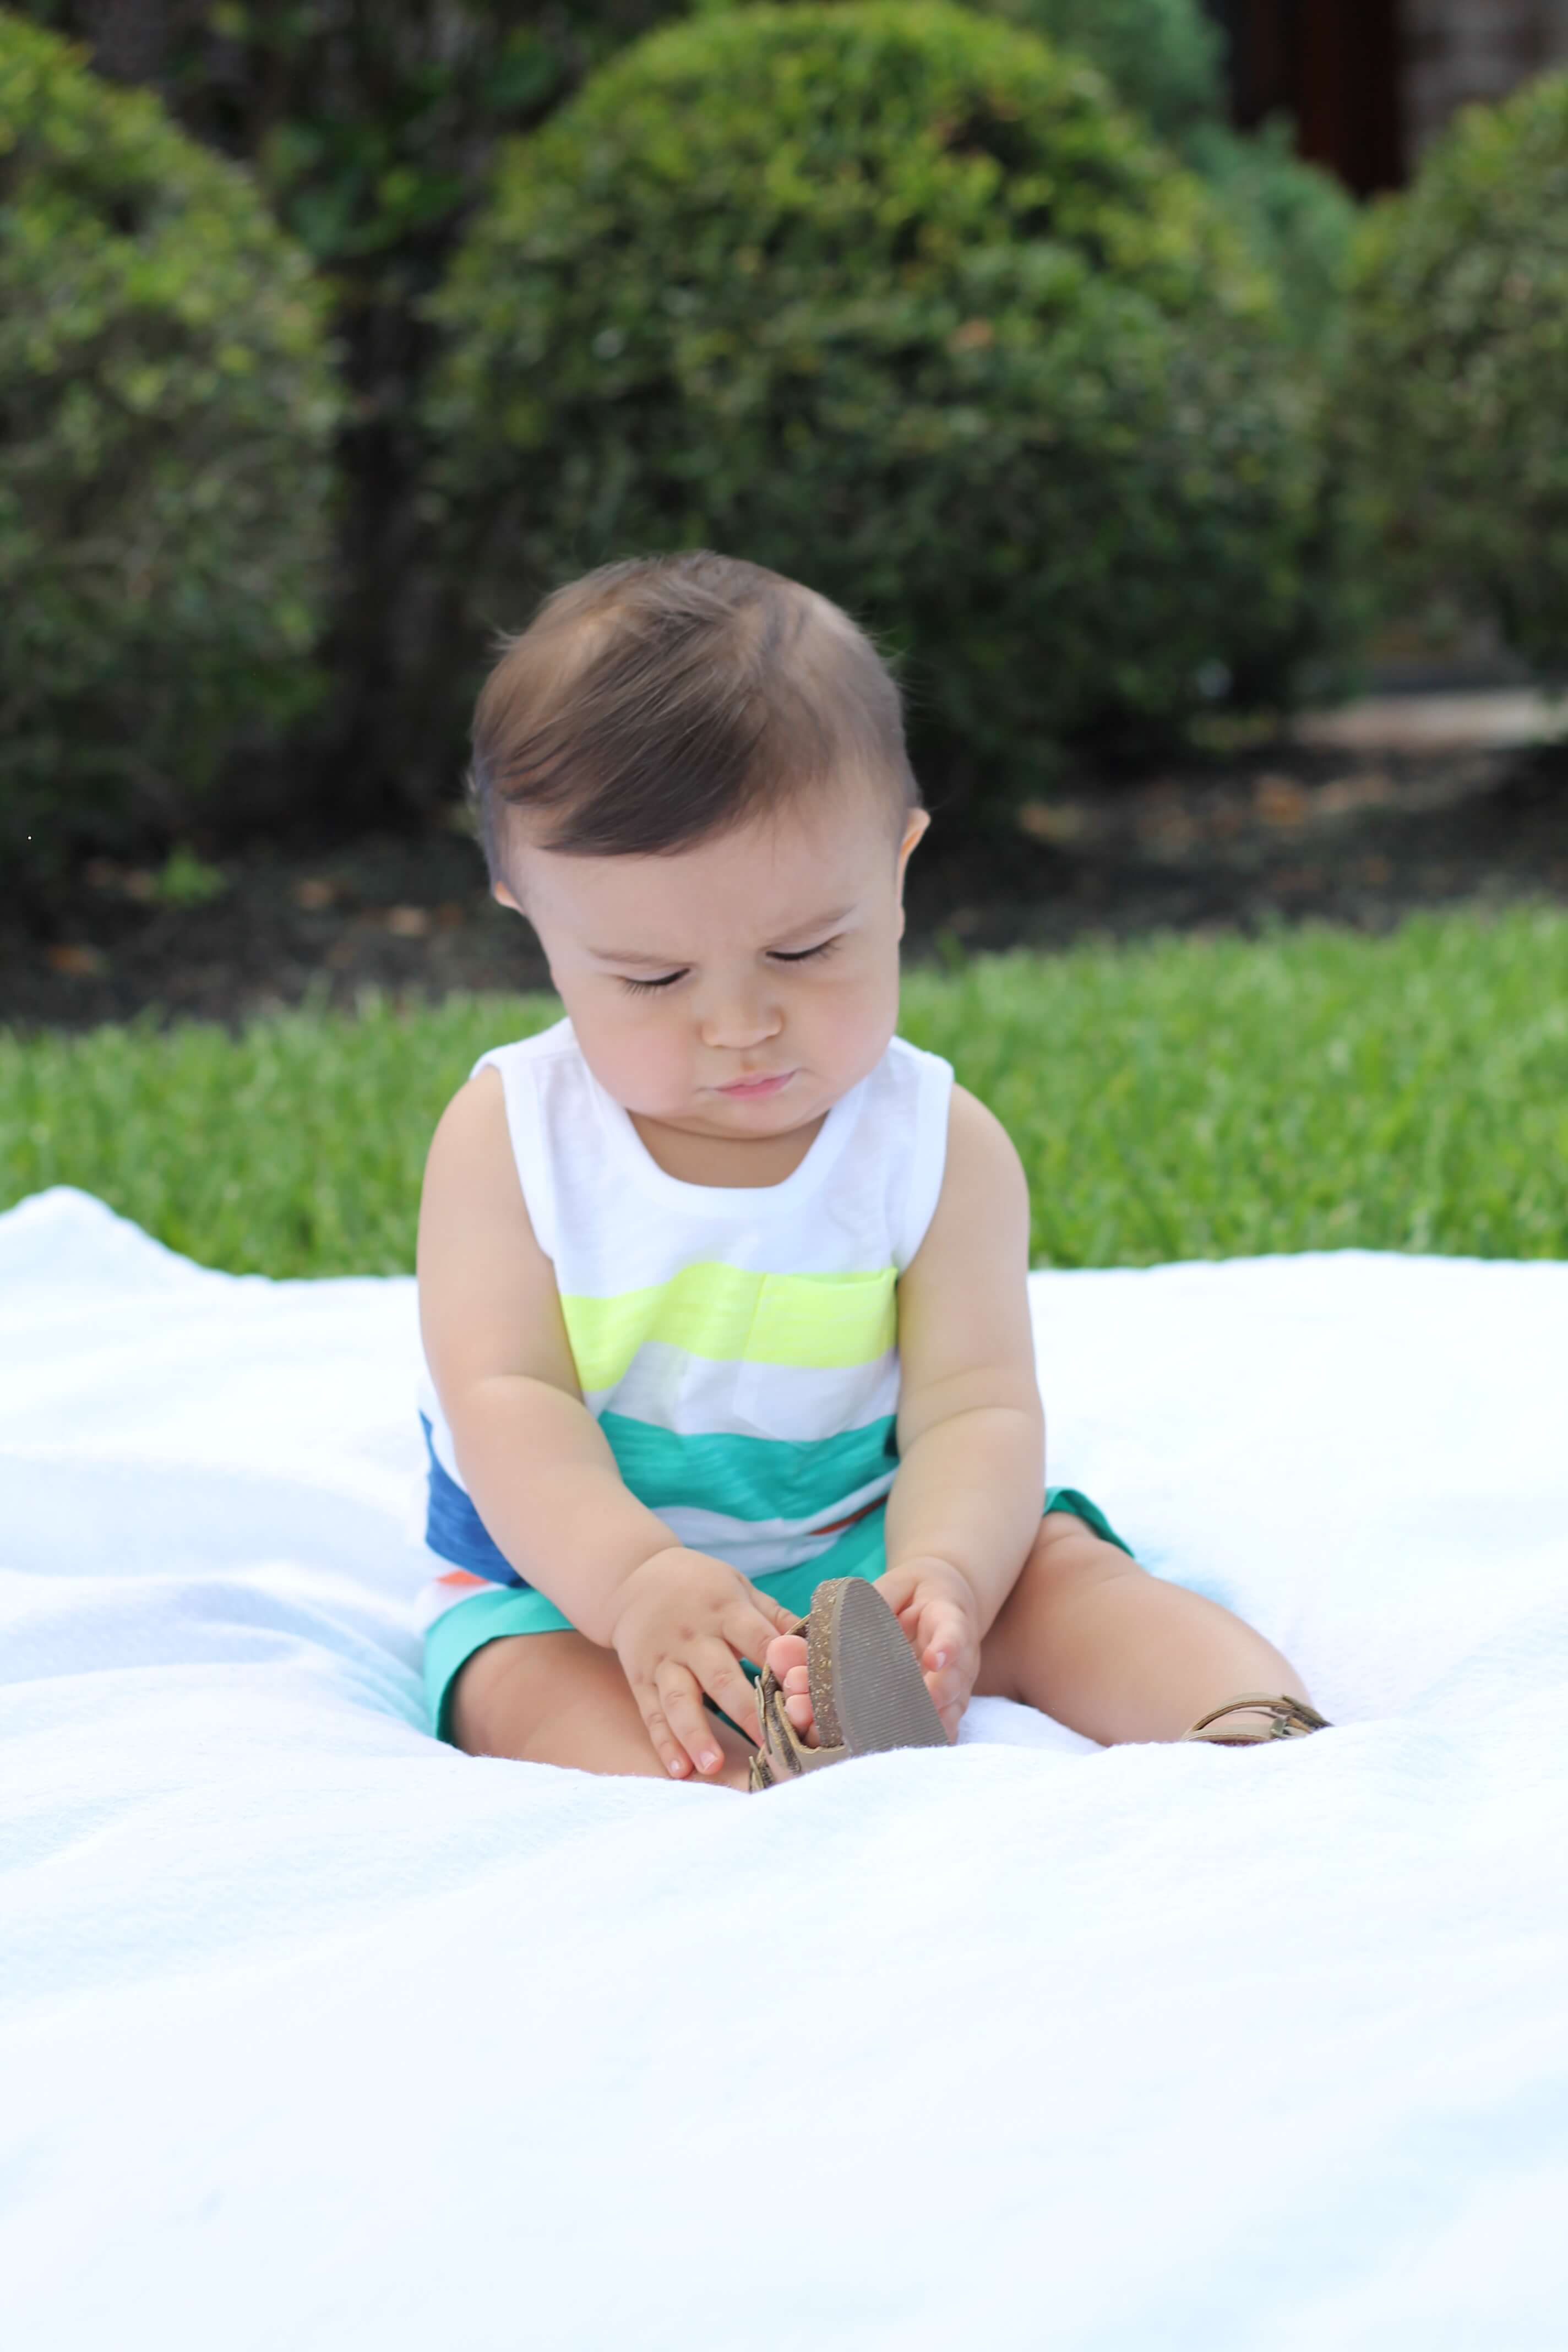 The ultimate guide to baby clothes for your baby's first year. What you really need and how much. #lovecarters (AD)